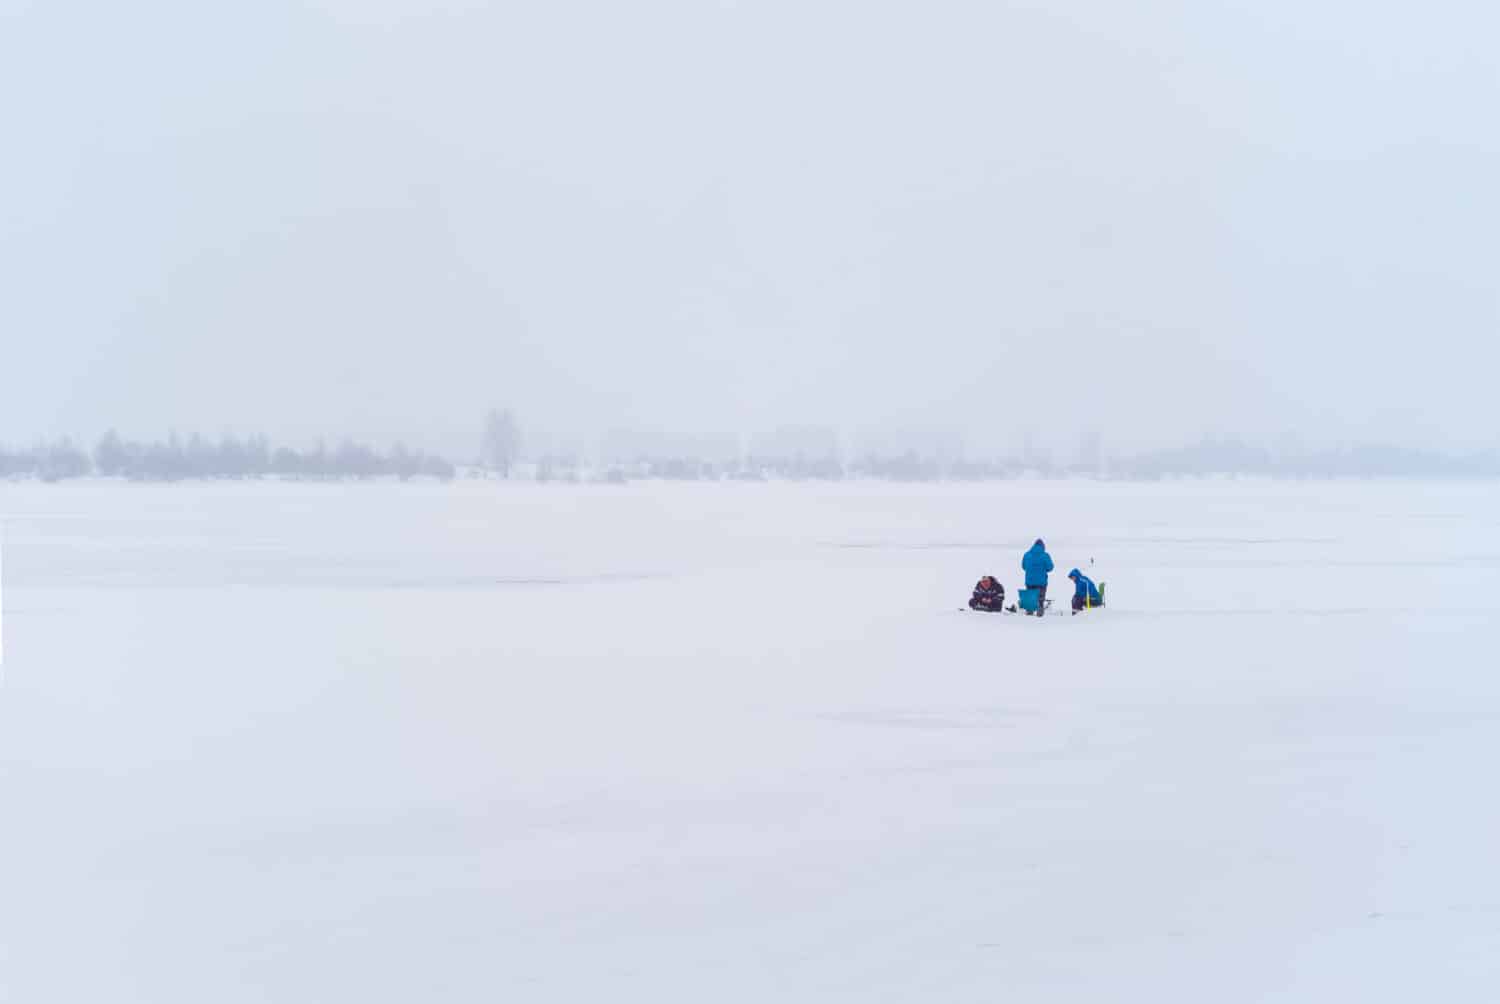 three fishermen in the distance do ice fishing in a foggy snowy winter landscape